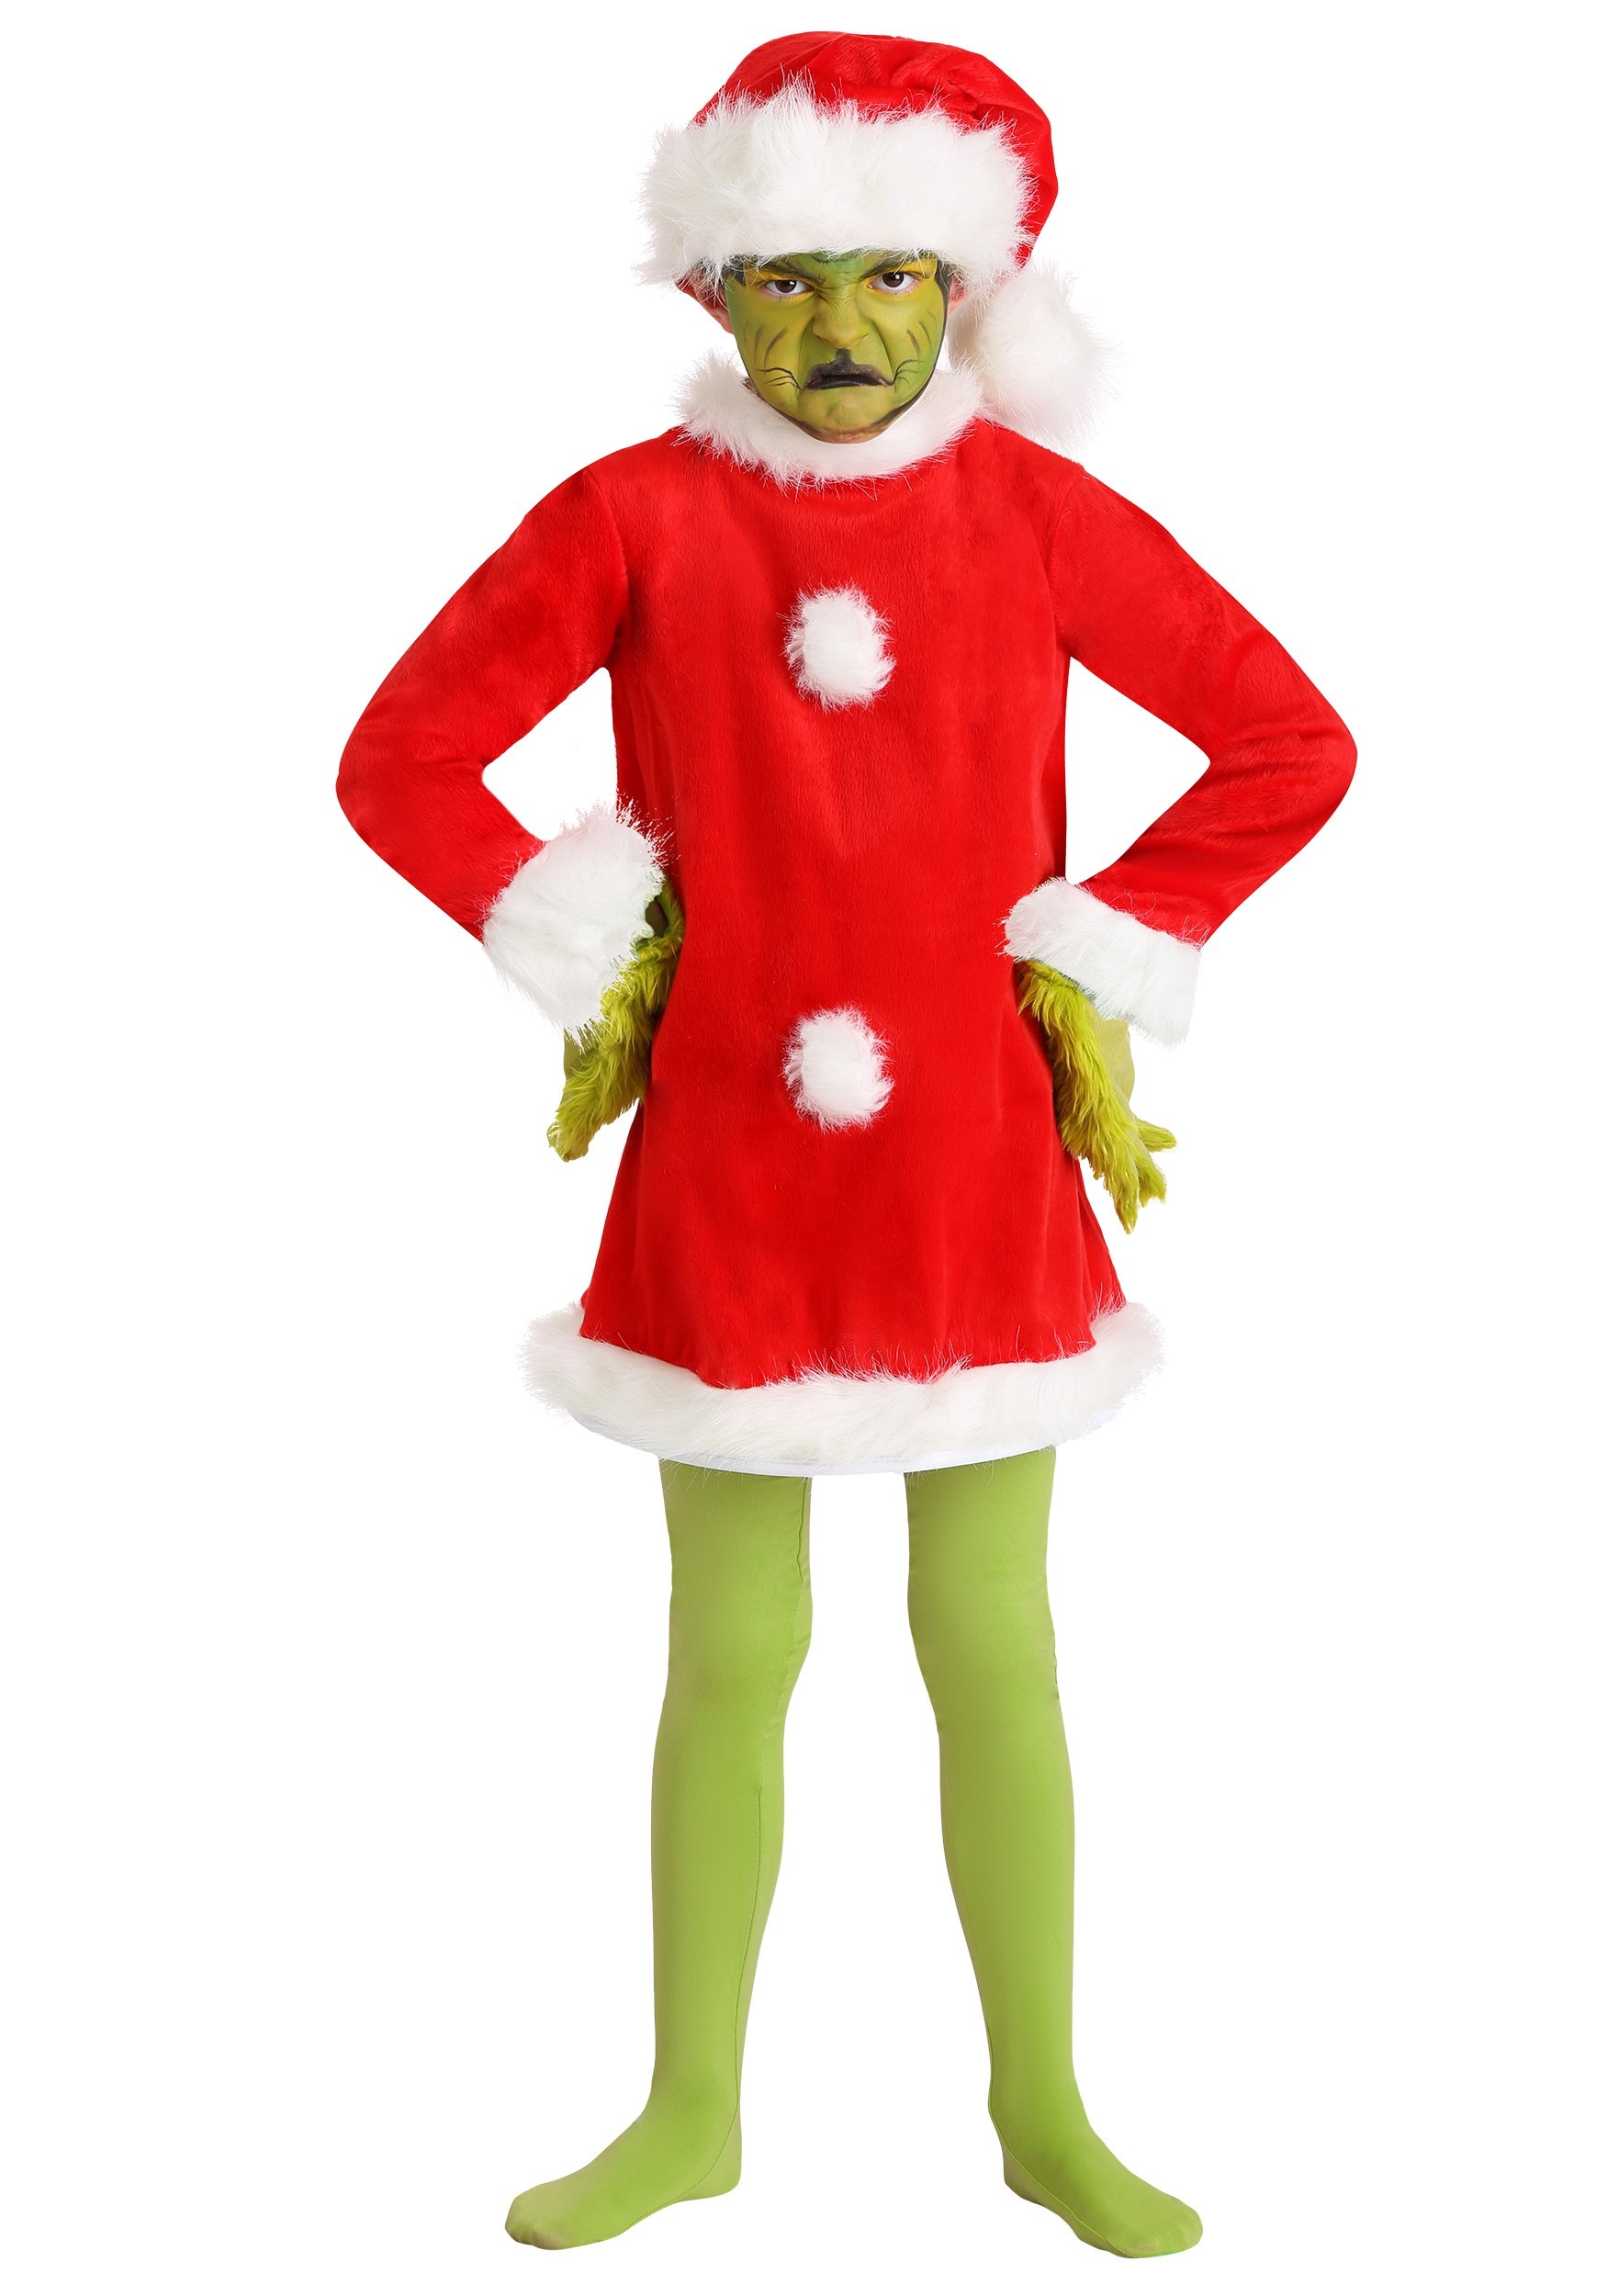 The Grinch Santa Deluxe Costume with Mask for Kids